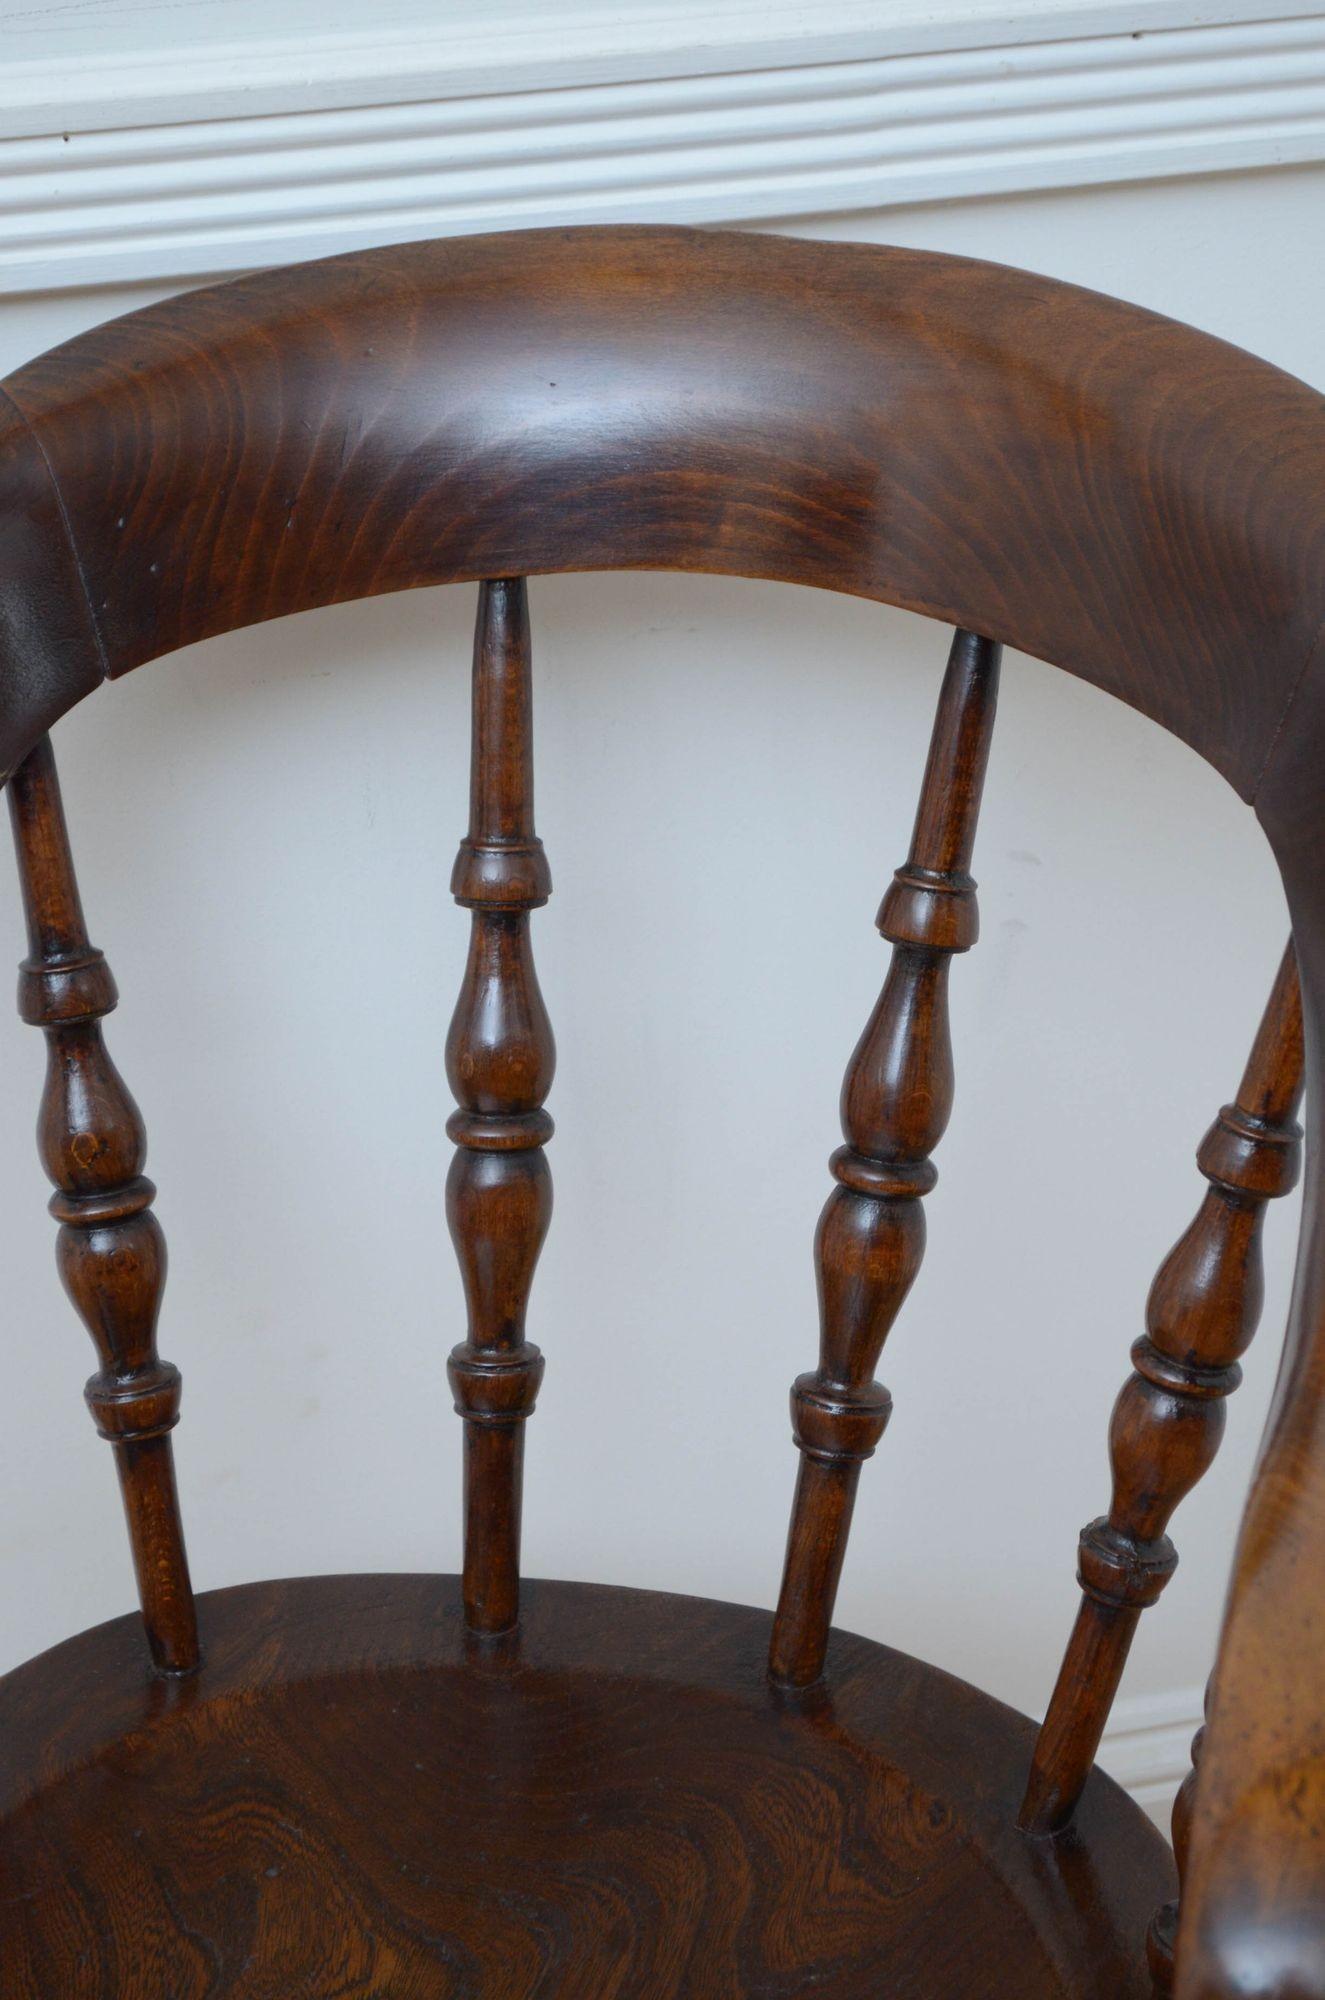 Sn5356 Late Victorian desk chair with shaped top rail supported on spindles, generous elm seat and downswept arms, standing on turned legs united by double stretchers. This antique chair is in home ready condition. c1880.
H18.5